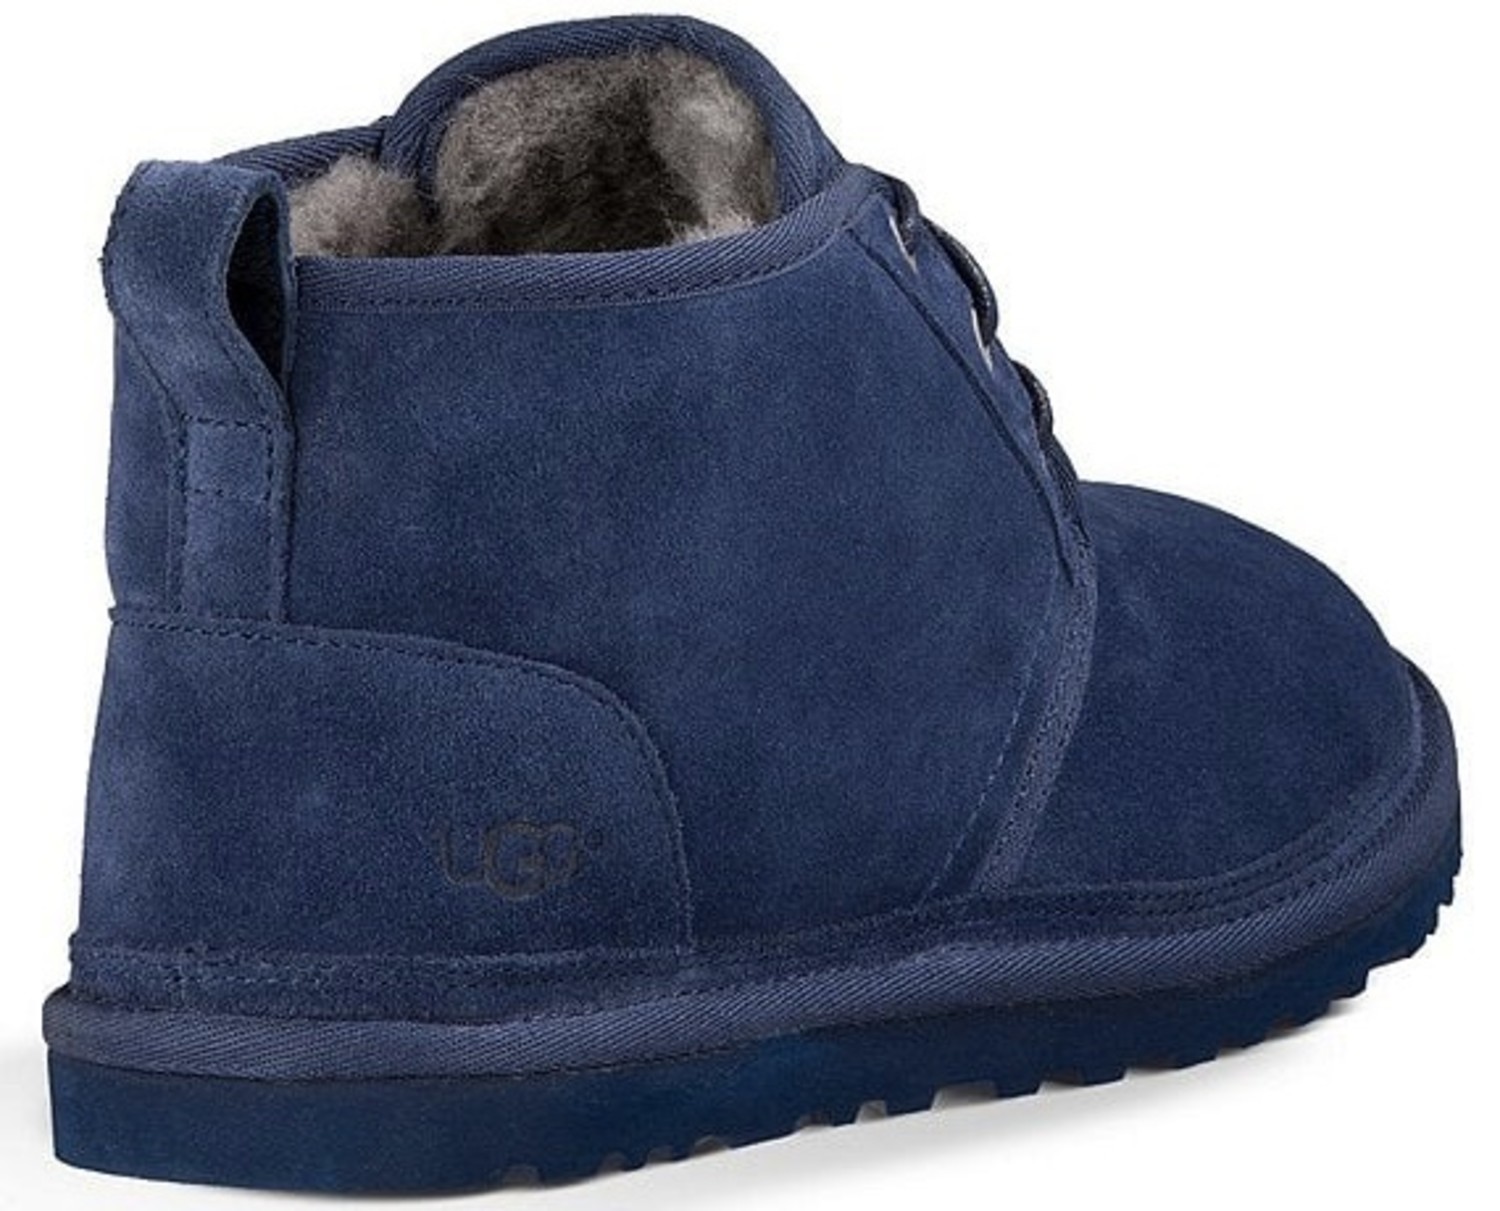 UGG Men's Neumel New Navy Suede Boot - Continental Shoes